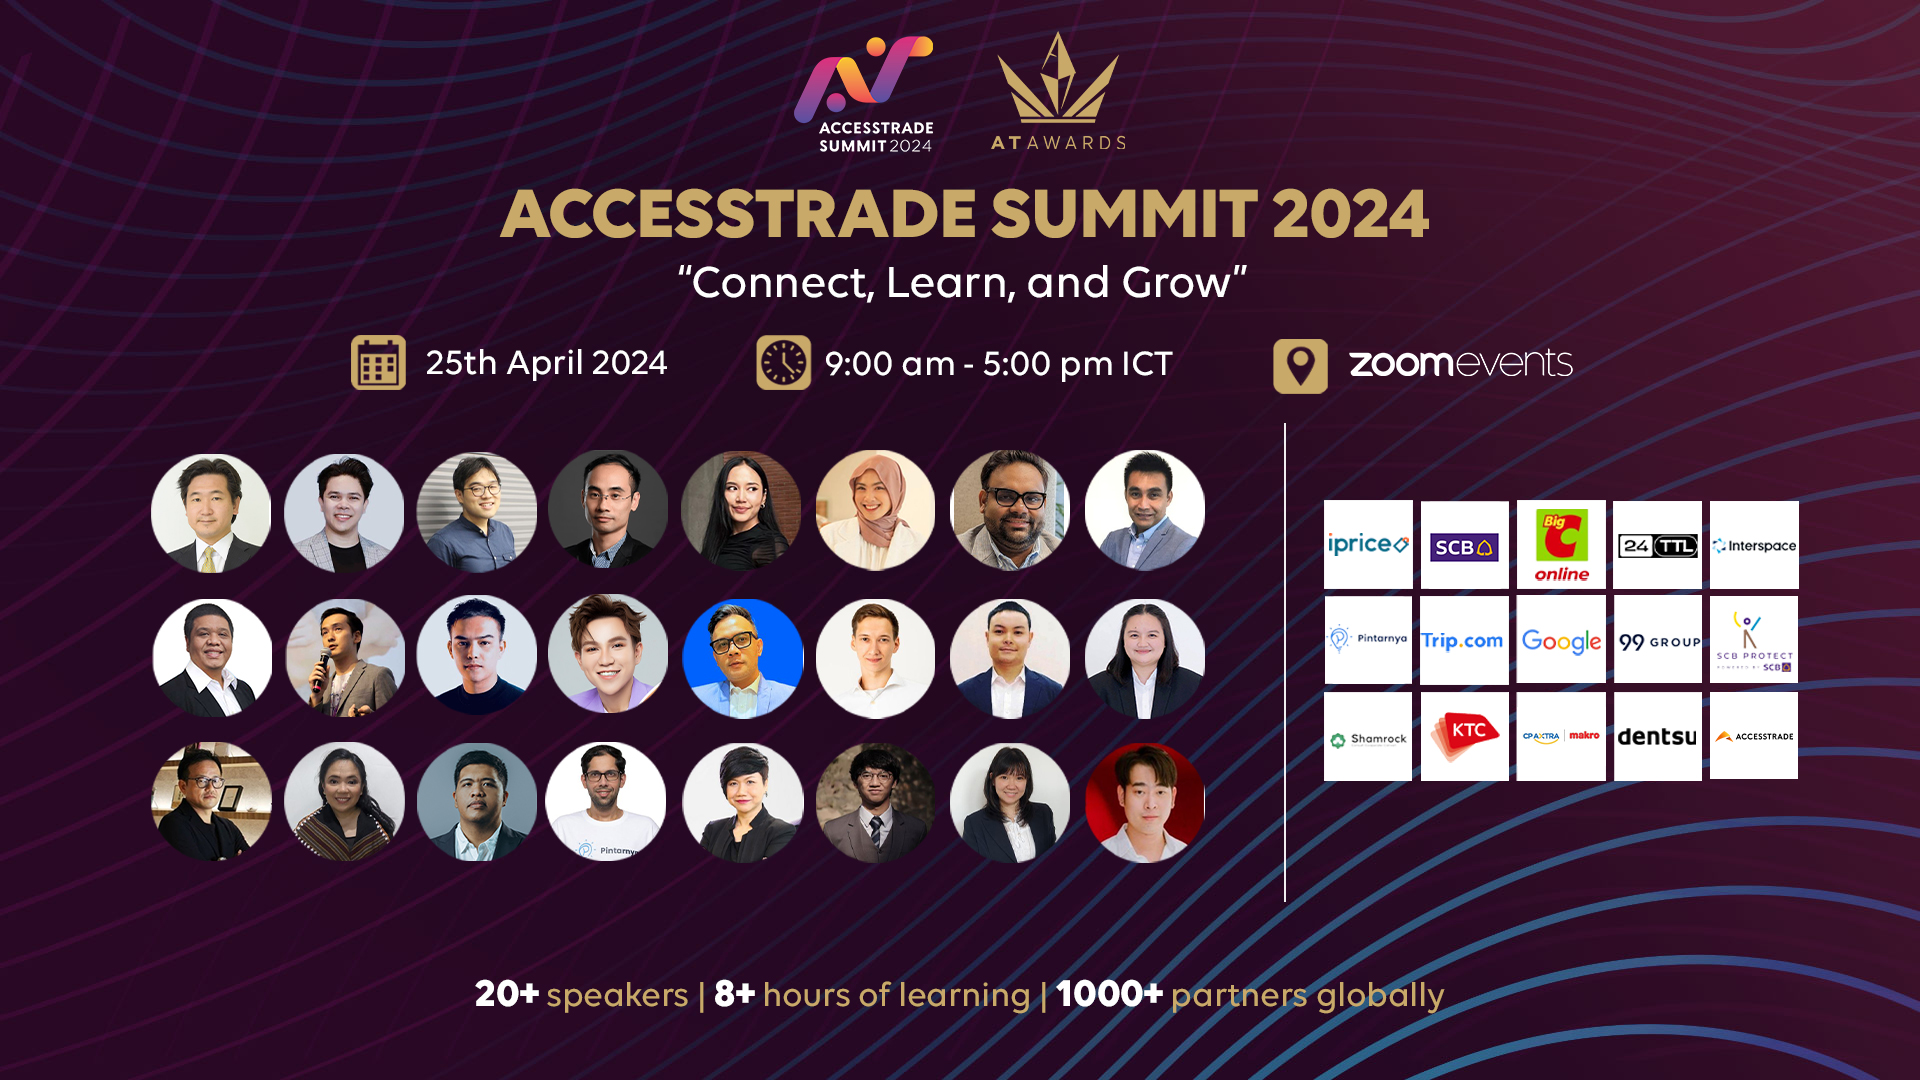 ACCESSTRADE Gathers Global Performance Marketing Experts In ACCESSTRADE SUMMIT 2024